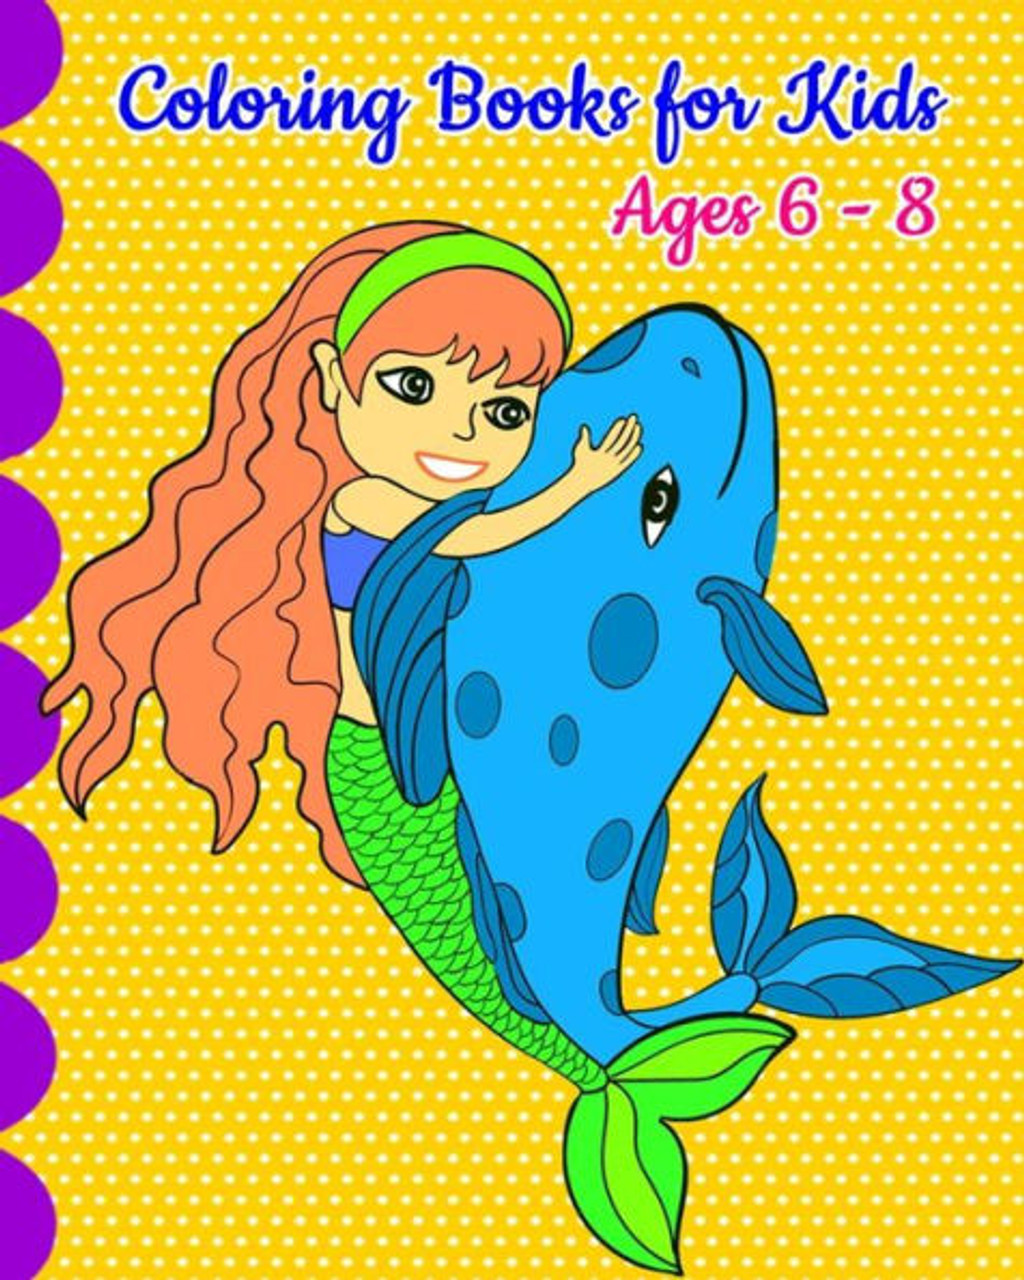 Coloring Books for Kids Ages 6 - 8: Mermaid Coloring Book, Super